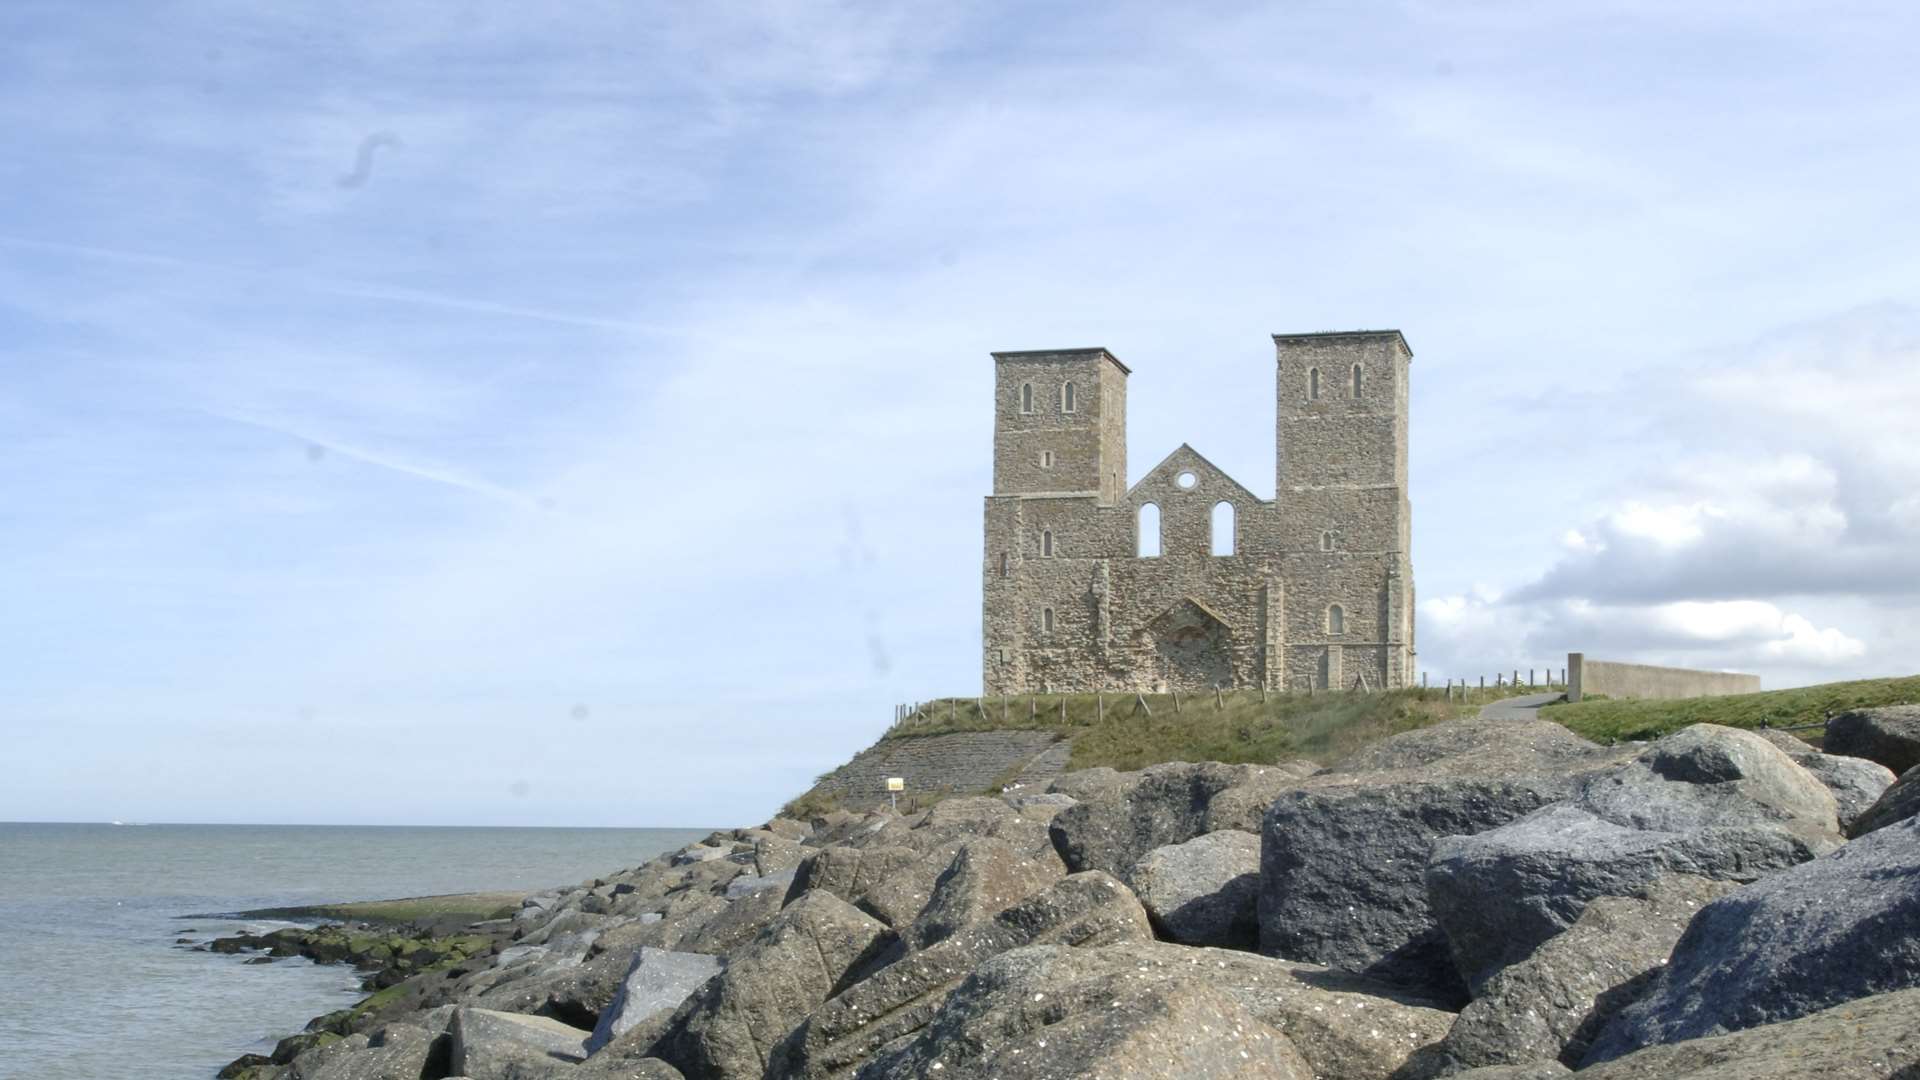 The dominating Reculver Towers